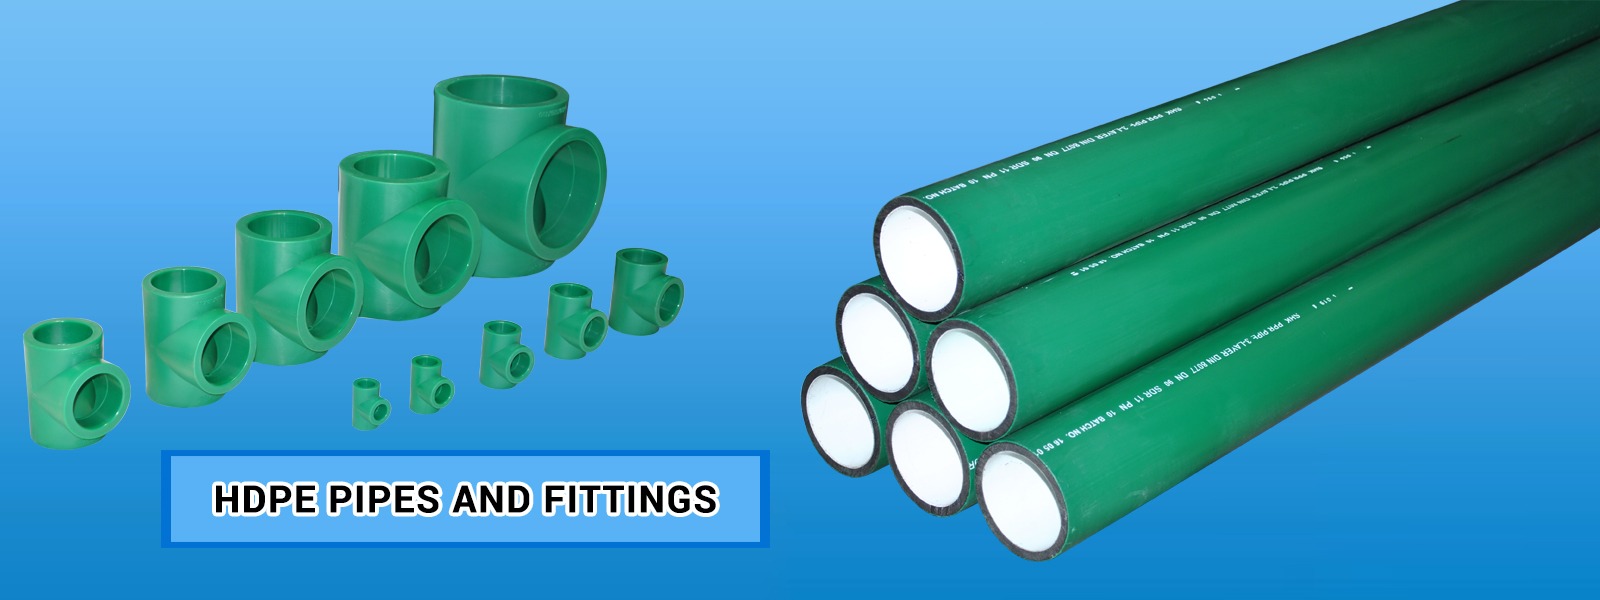 PPR-3 Layer Pipe Fittings Manufacturer